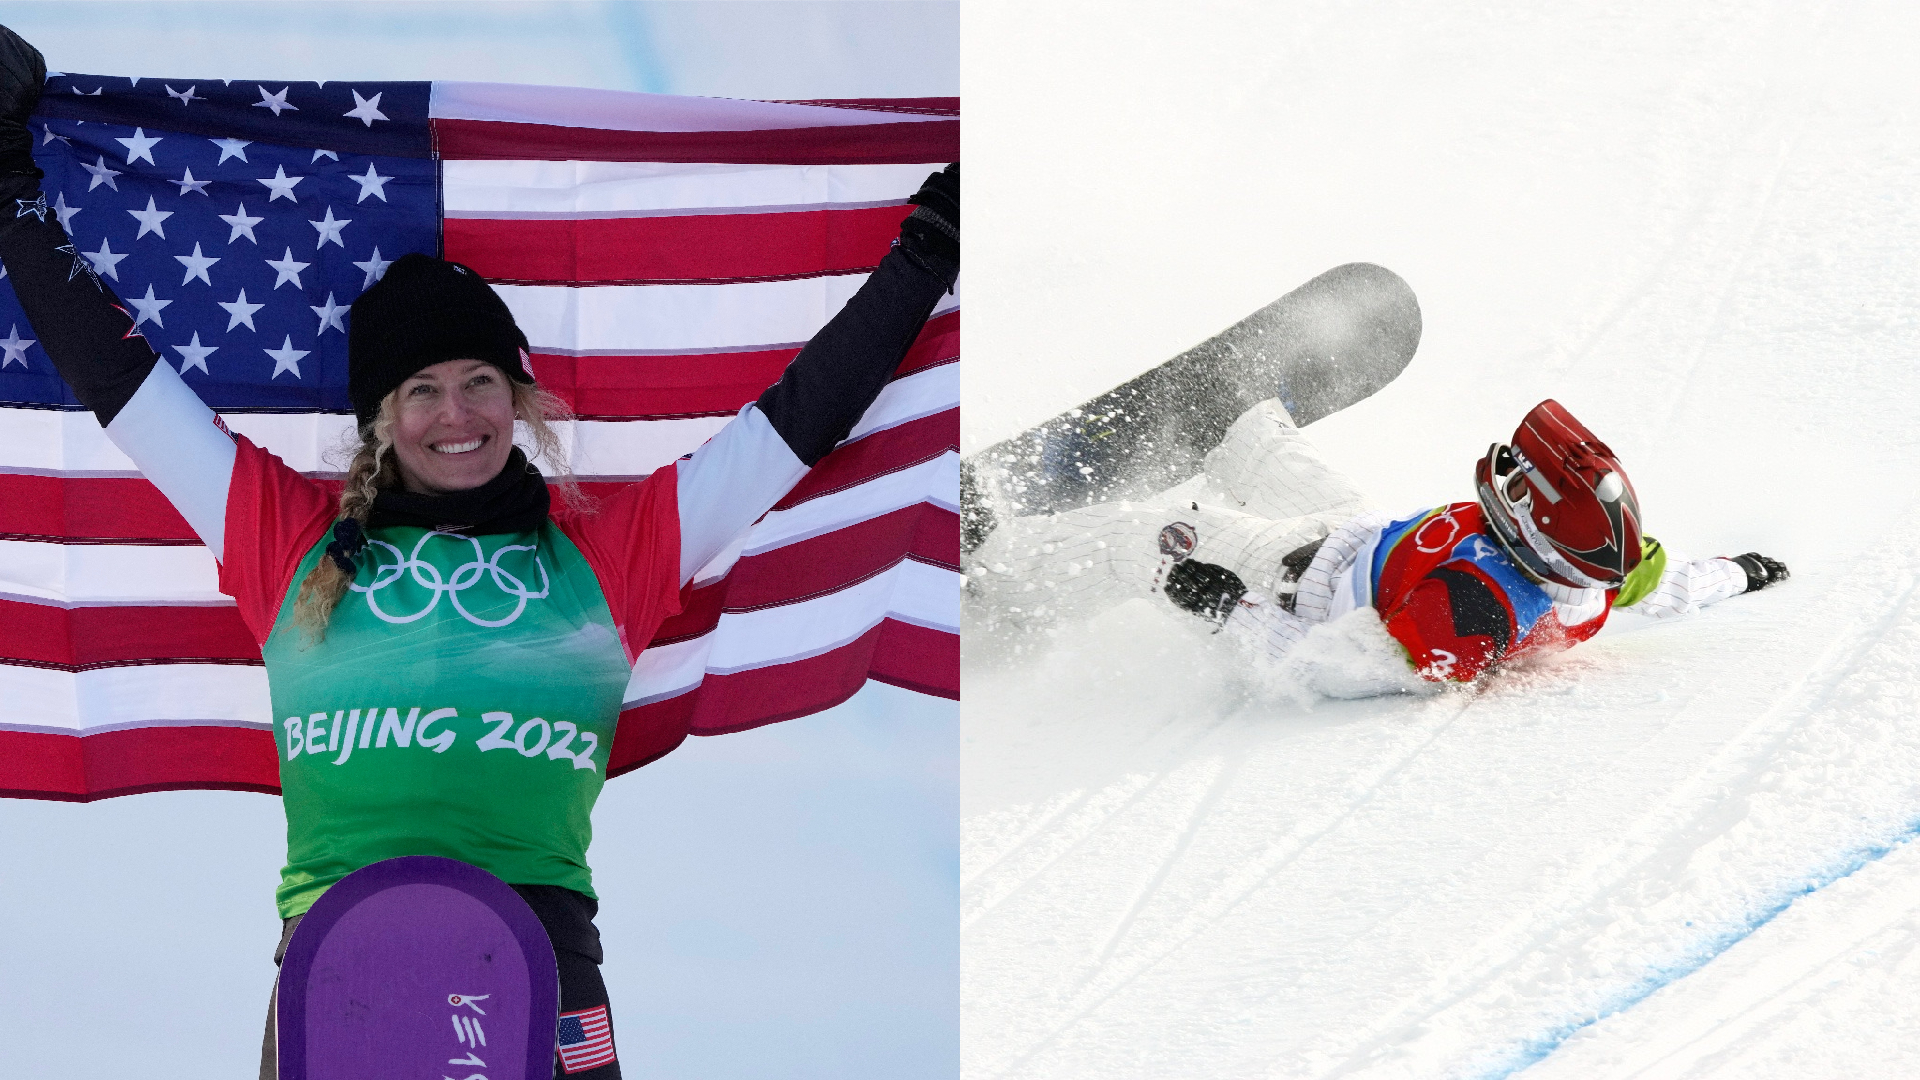 Olympic Snowboarder Who Lost Gold by Celebrating Too Early Has Made an Amazing Comeback